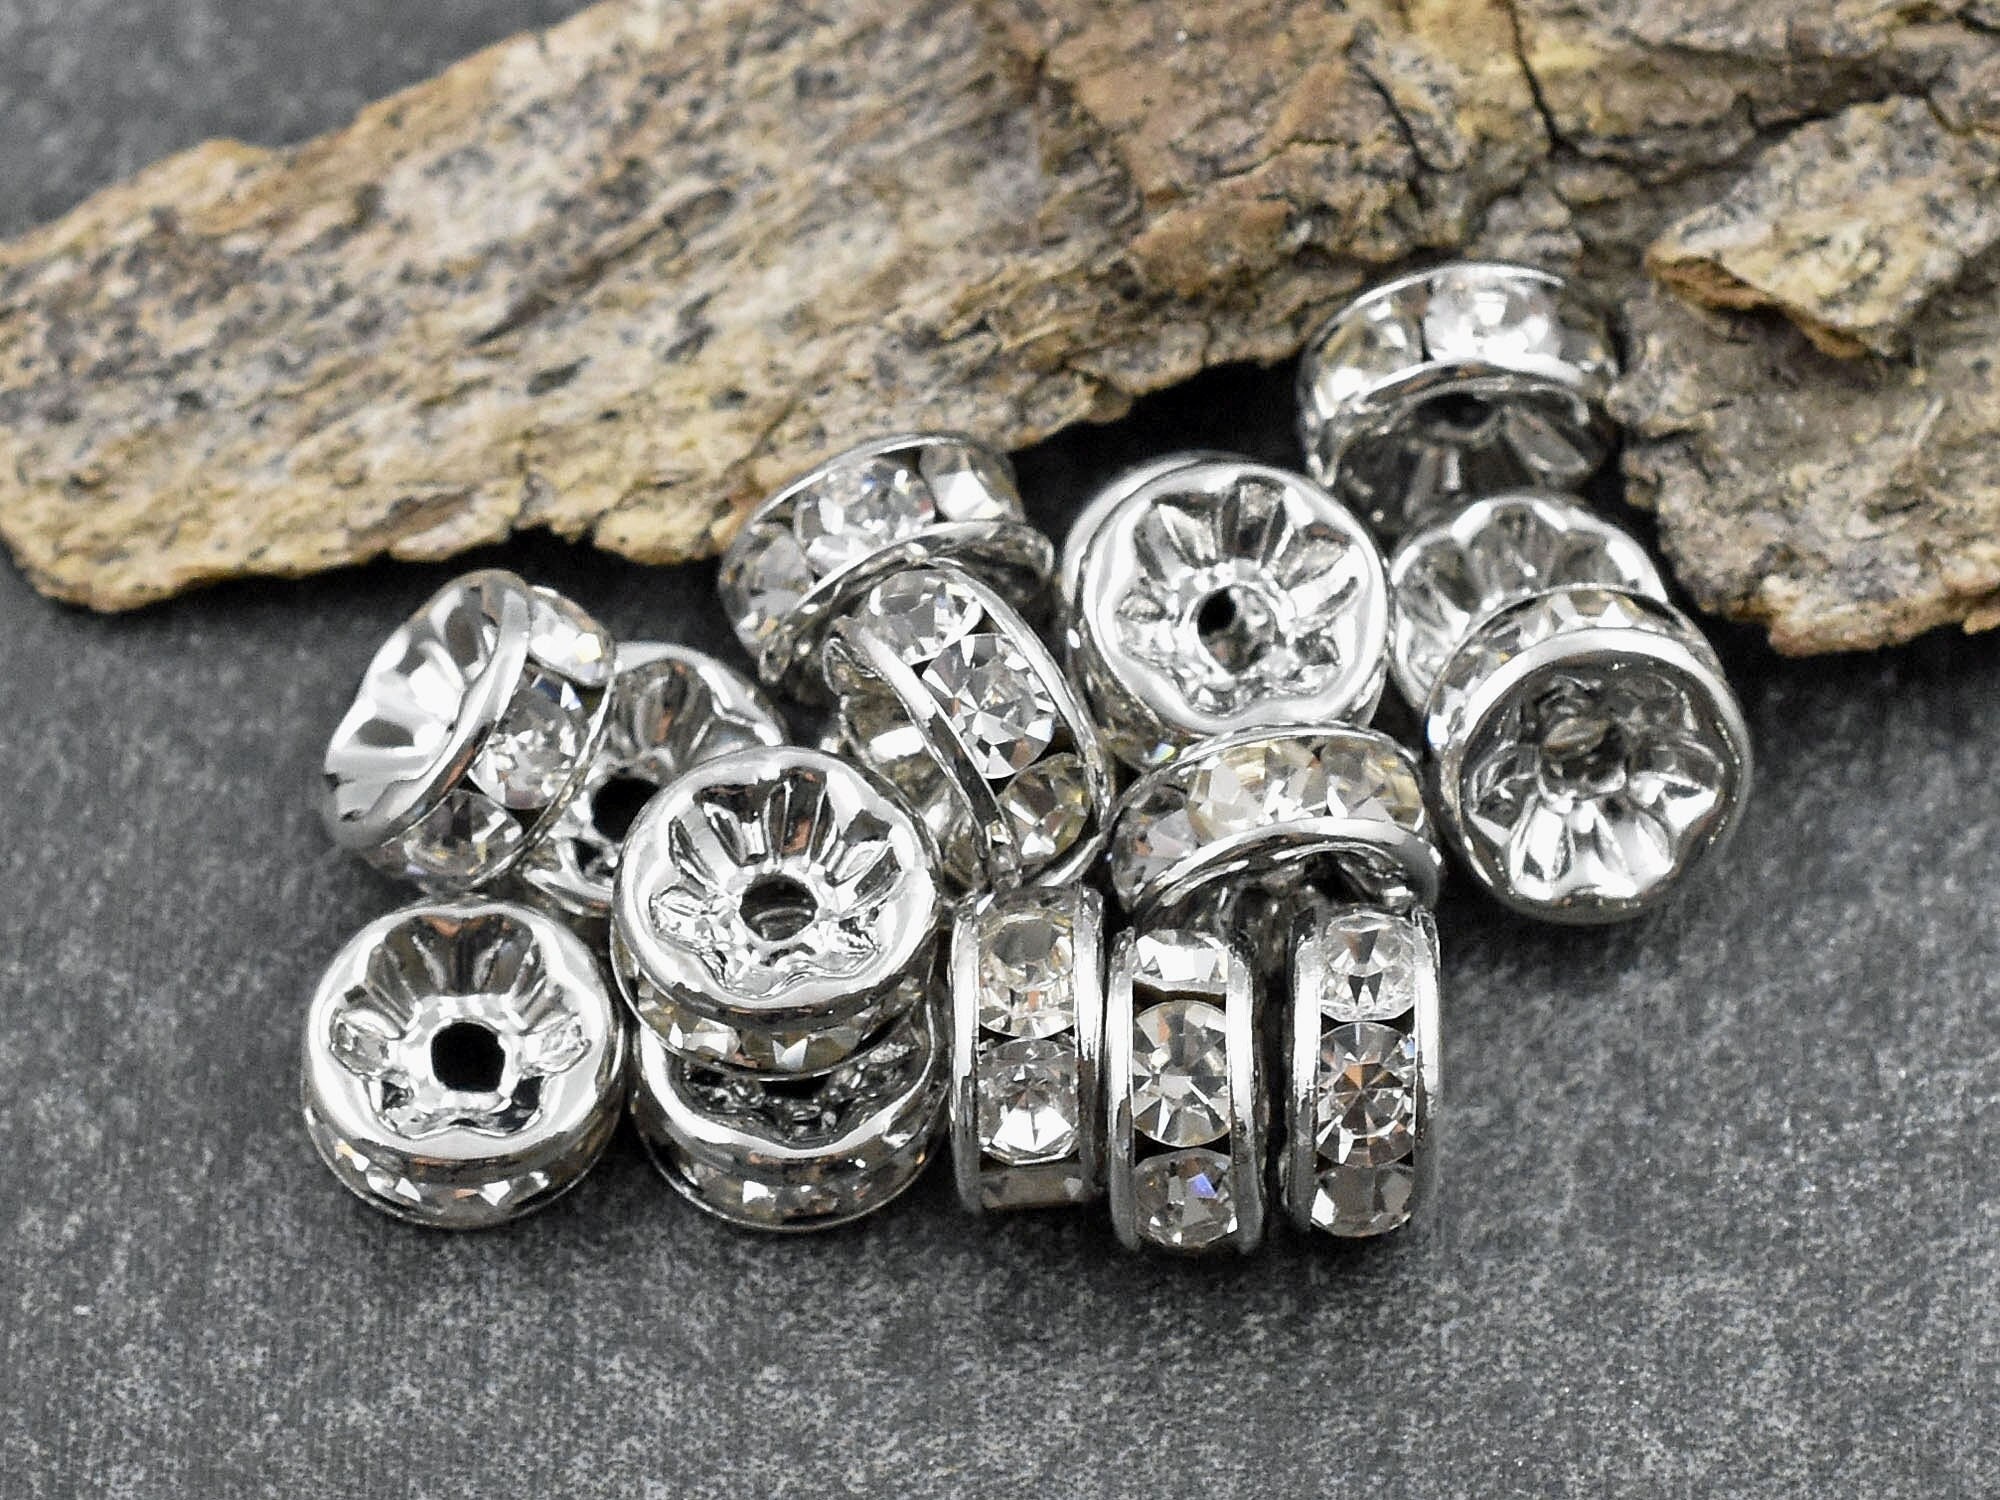 Silver Plated and Clear Crystal Rhinestone Wavy Rondelle Spacer Beads, 4mm,  20pcs.